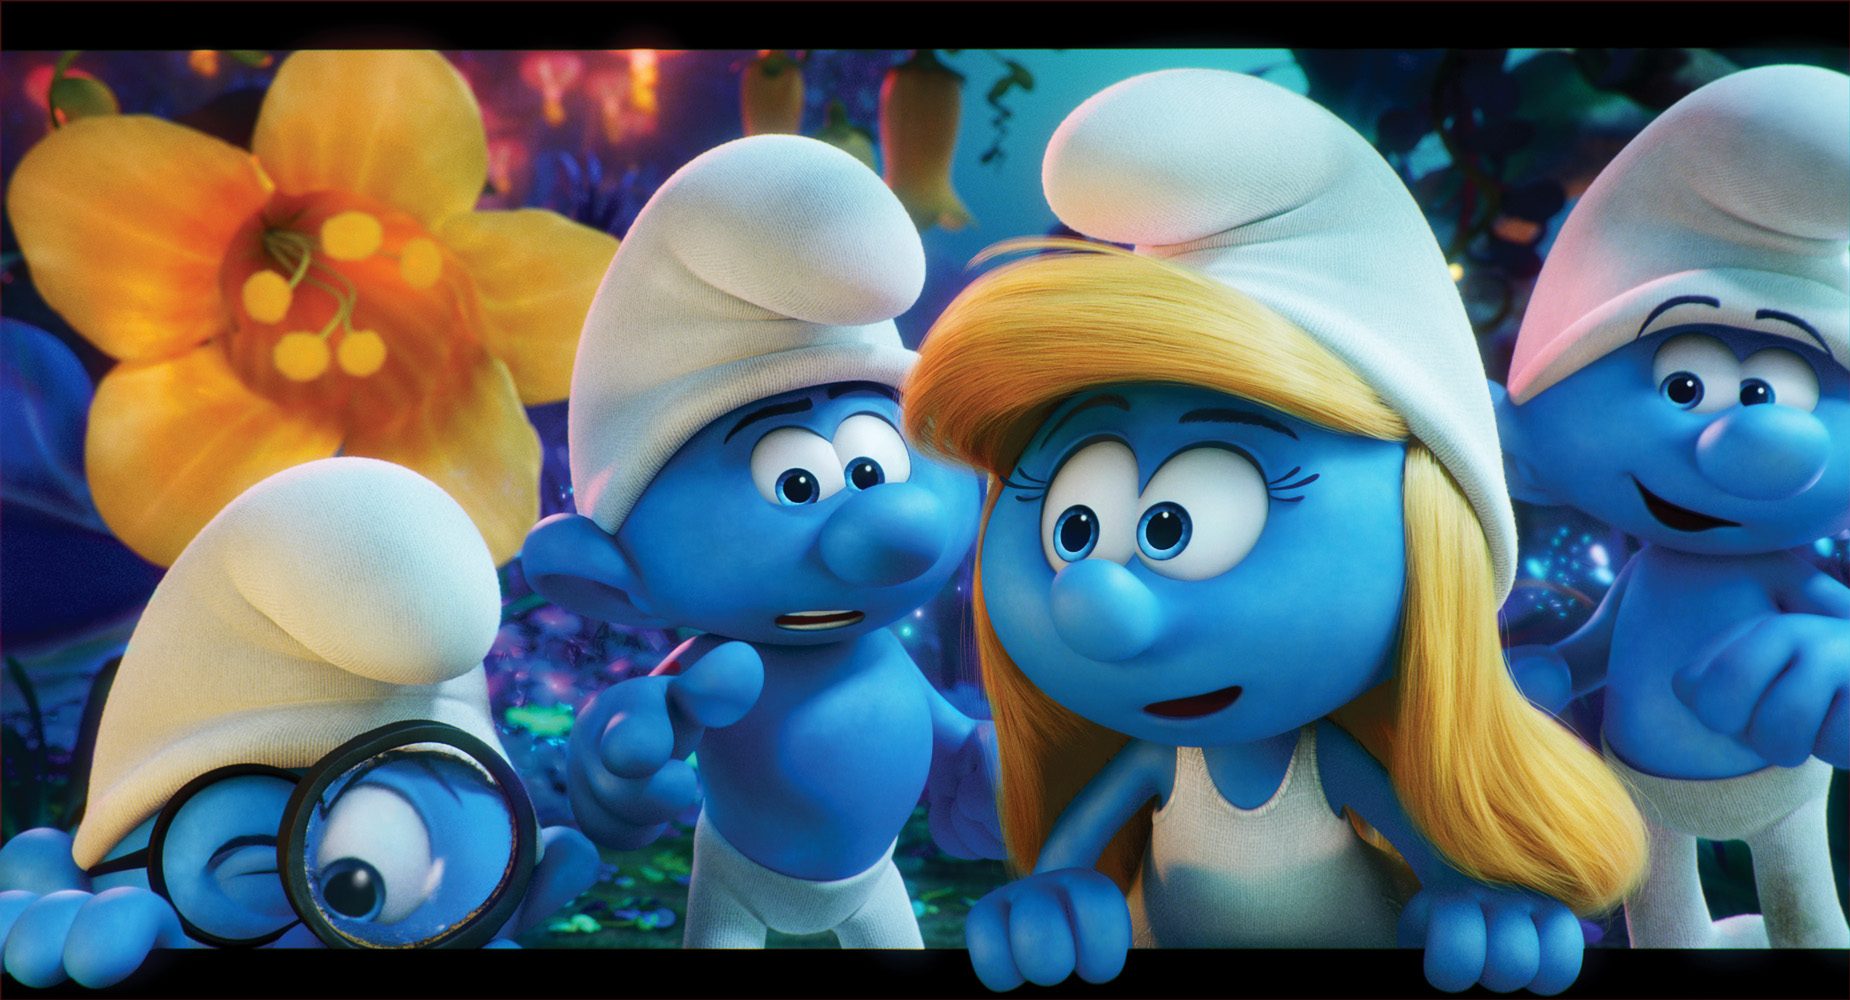 Brainy (Danny Pudi), Hefty (Joe Manganiello), Smurfette (Demi Lovato) and Clumsy (Jack McBrayer) embark on an exciting and thrilling race through the Forbidden Forest. Photo courtesy of Columbia Pictures  